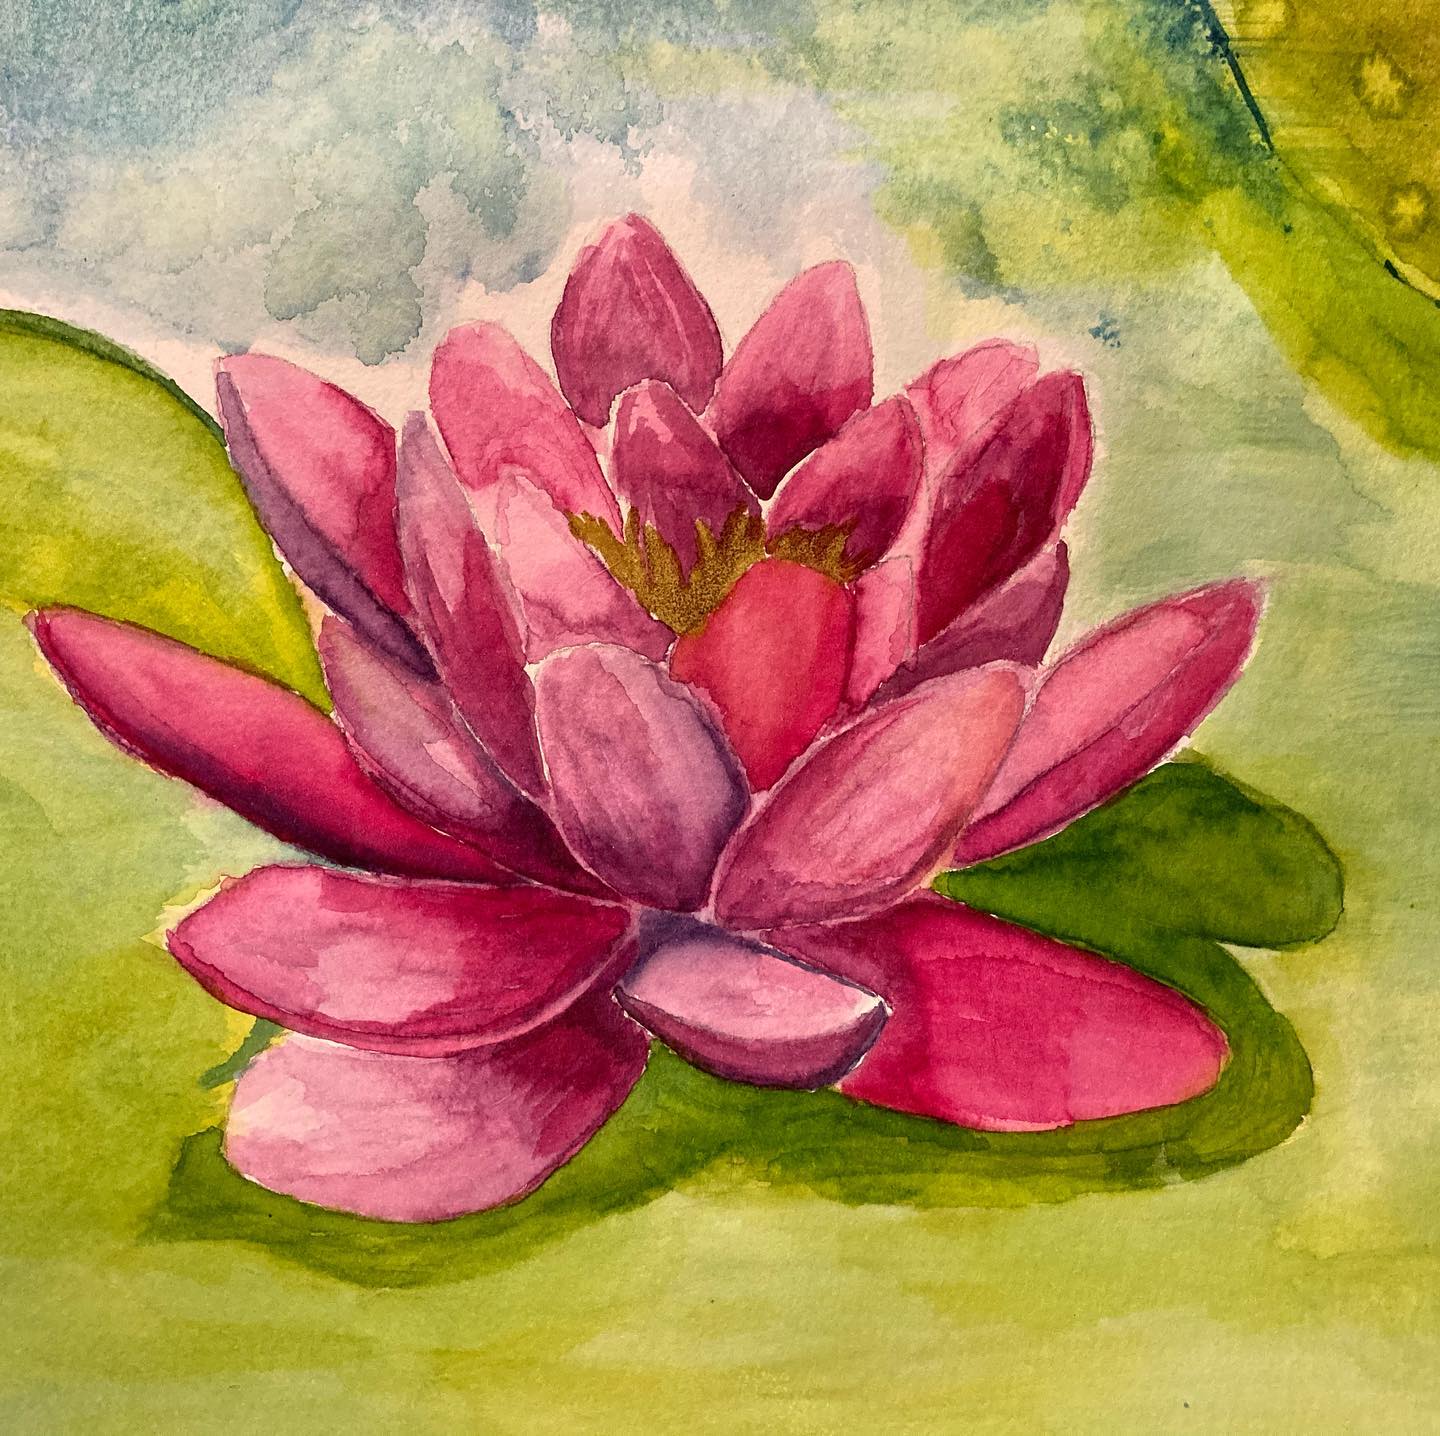 Watercolor painting of a bright pink water lily